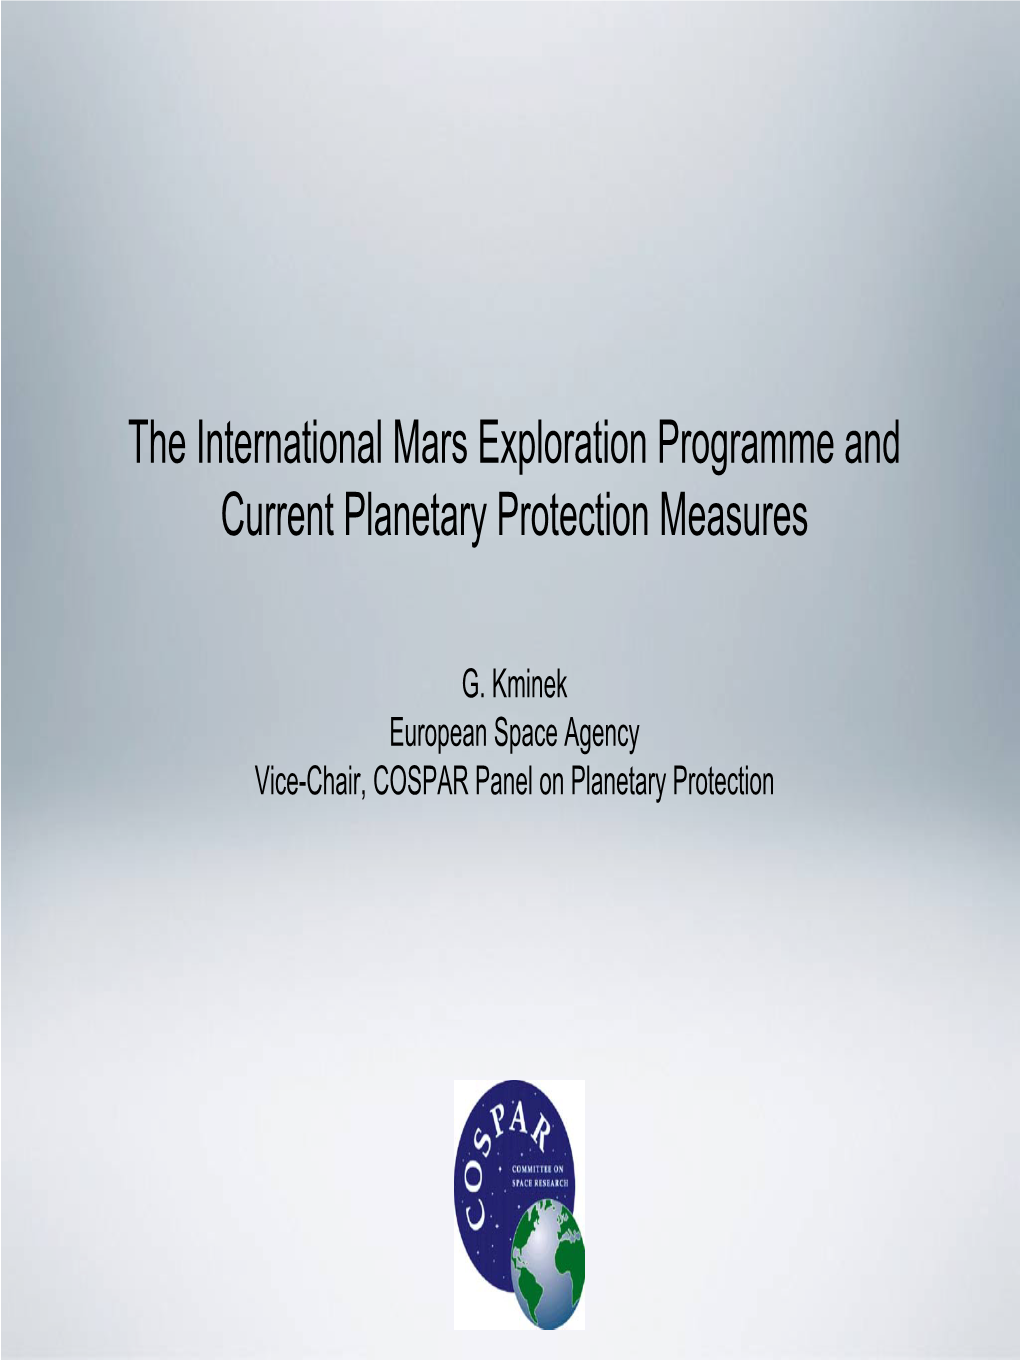 The International Mars Exploration Programme and Current Planetary Protection Measures